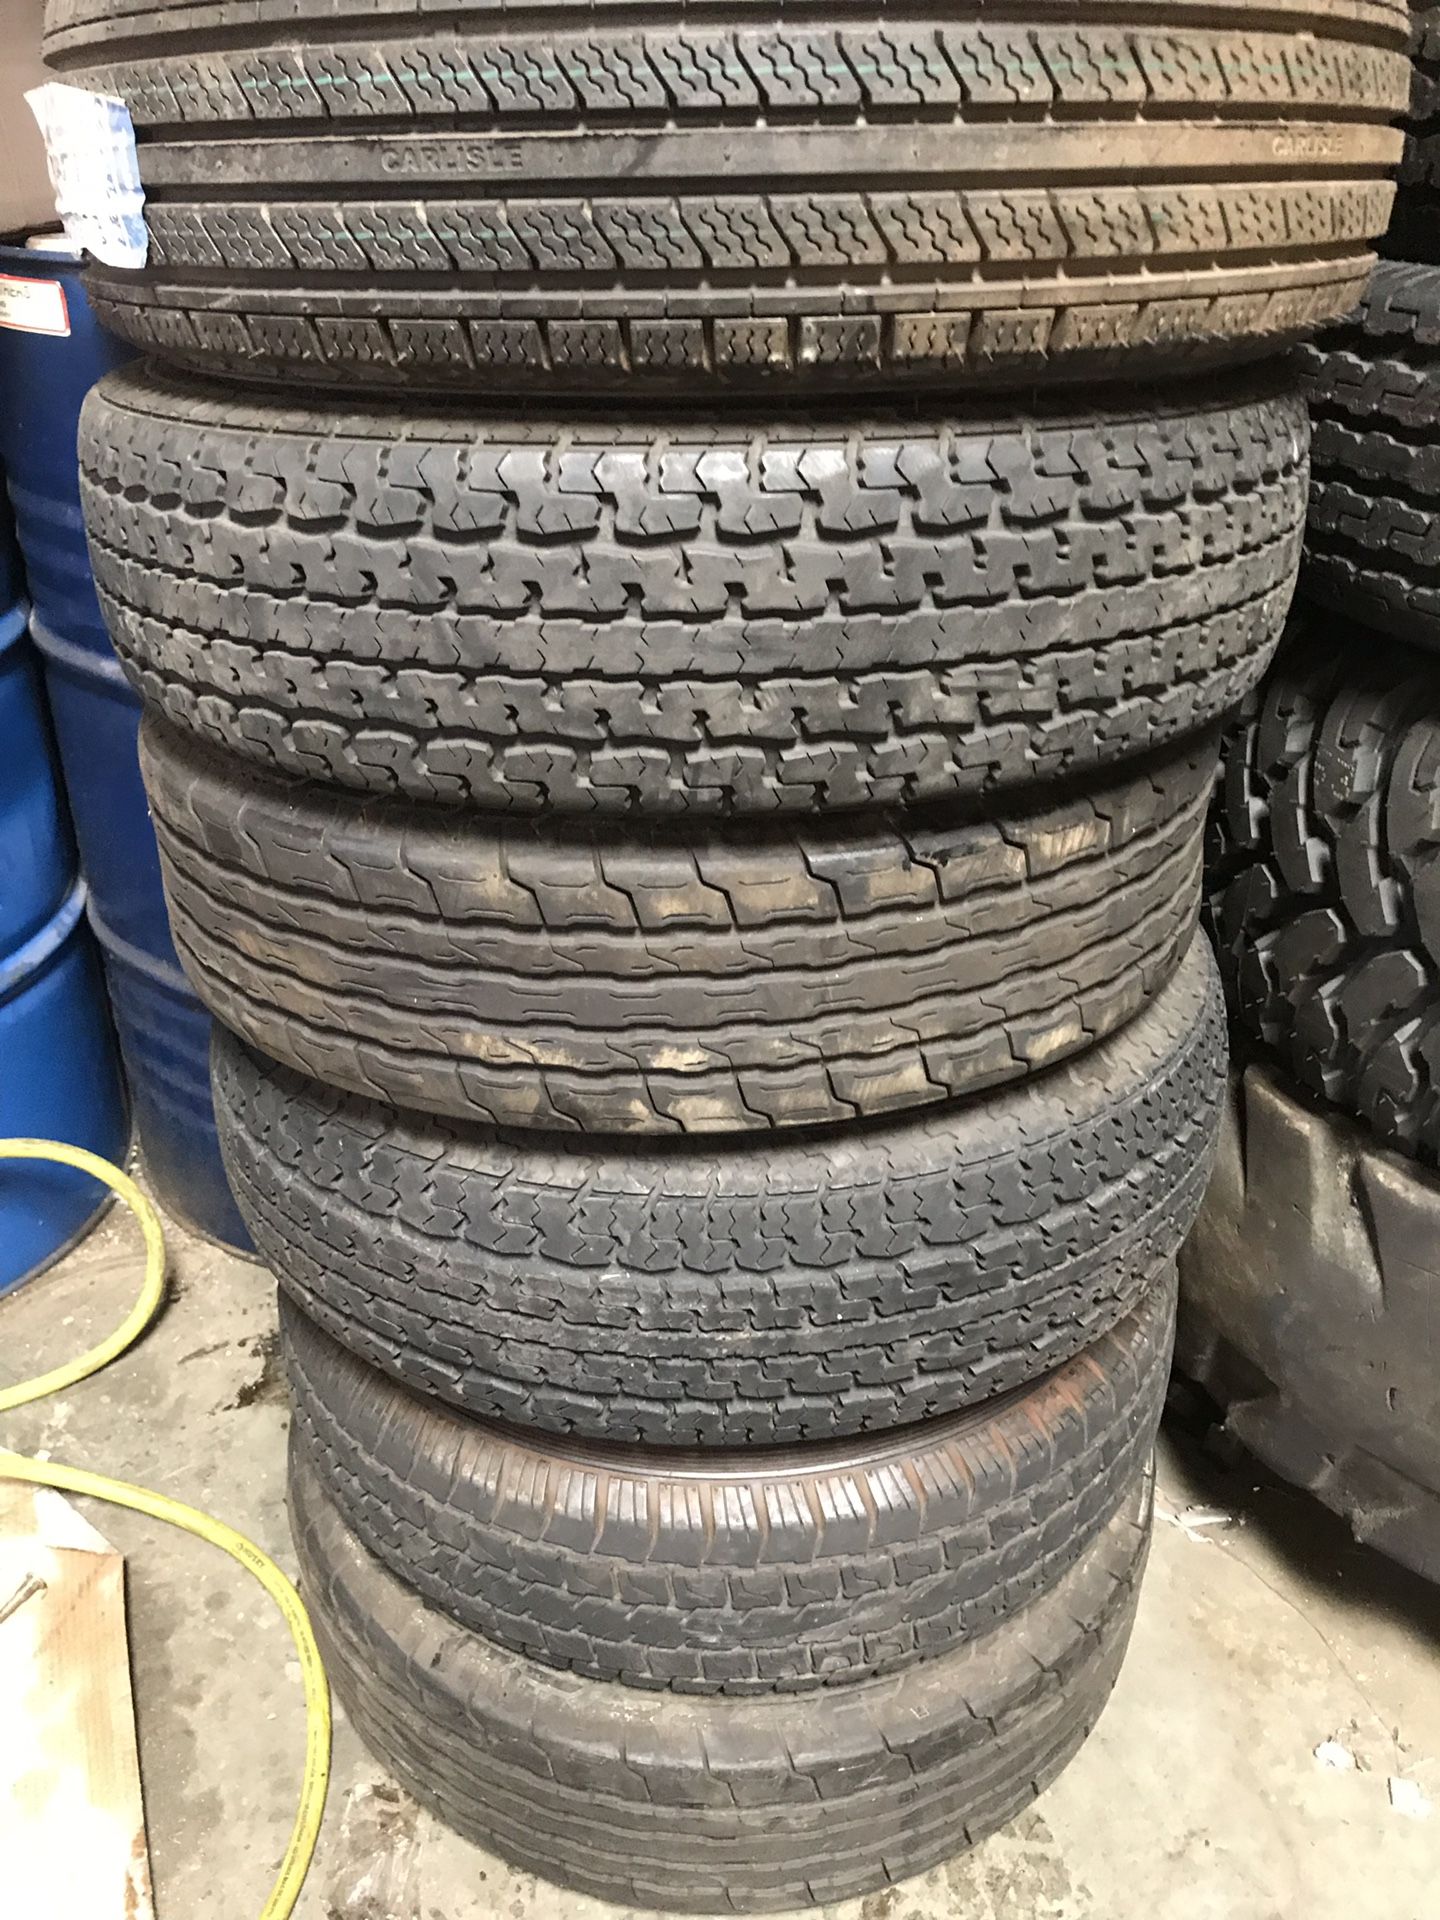 1x USED ST trailer tire ST 205x75-14 each $35 Install included I have 8 tires